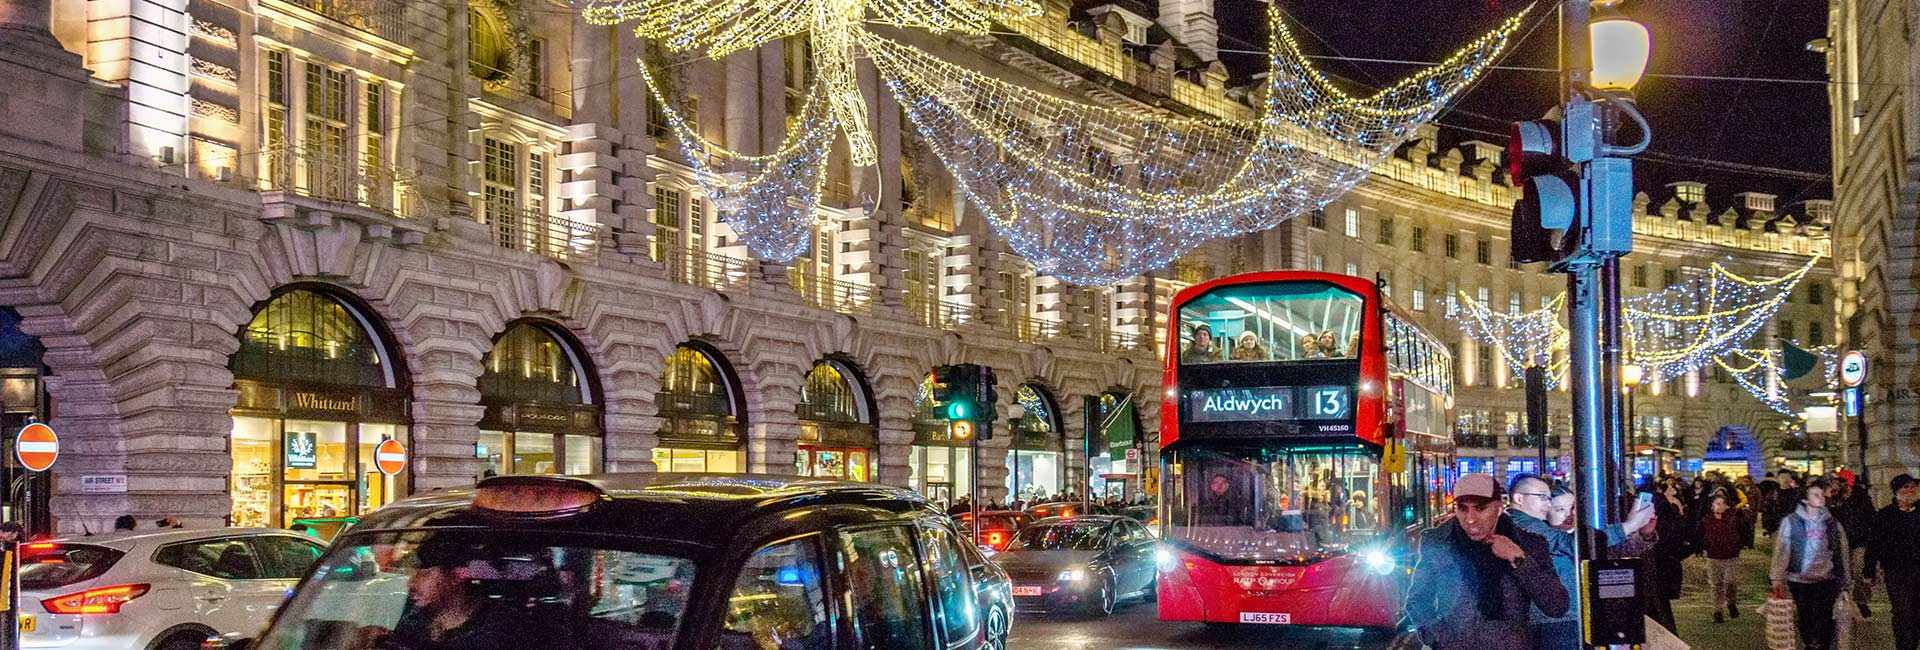 Top 10 Places to go Christmas Shopping | Berkeley Group